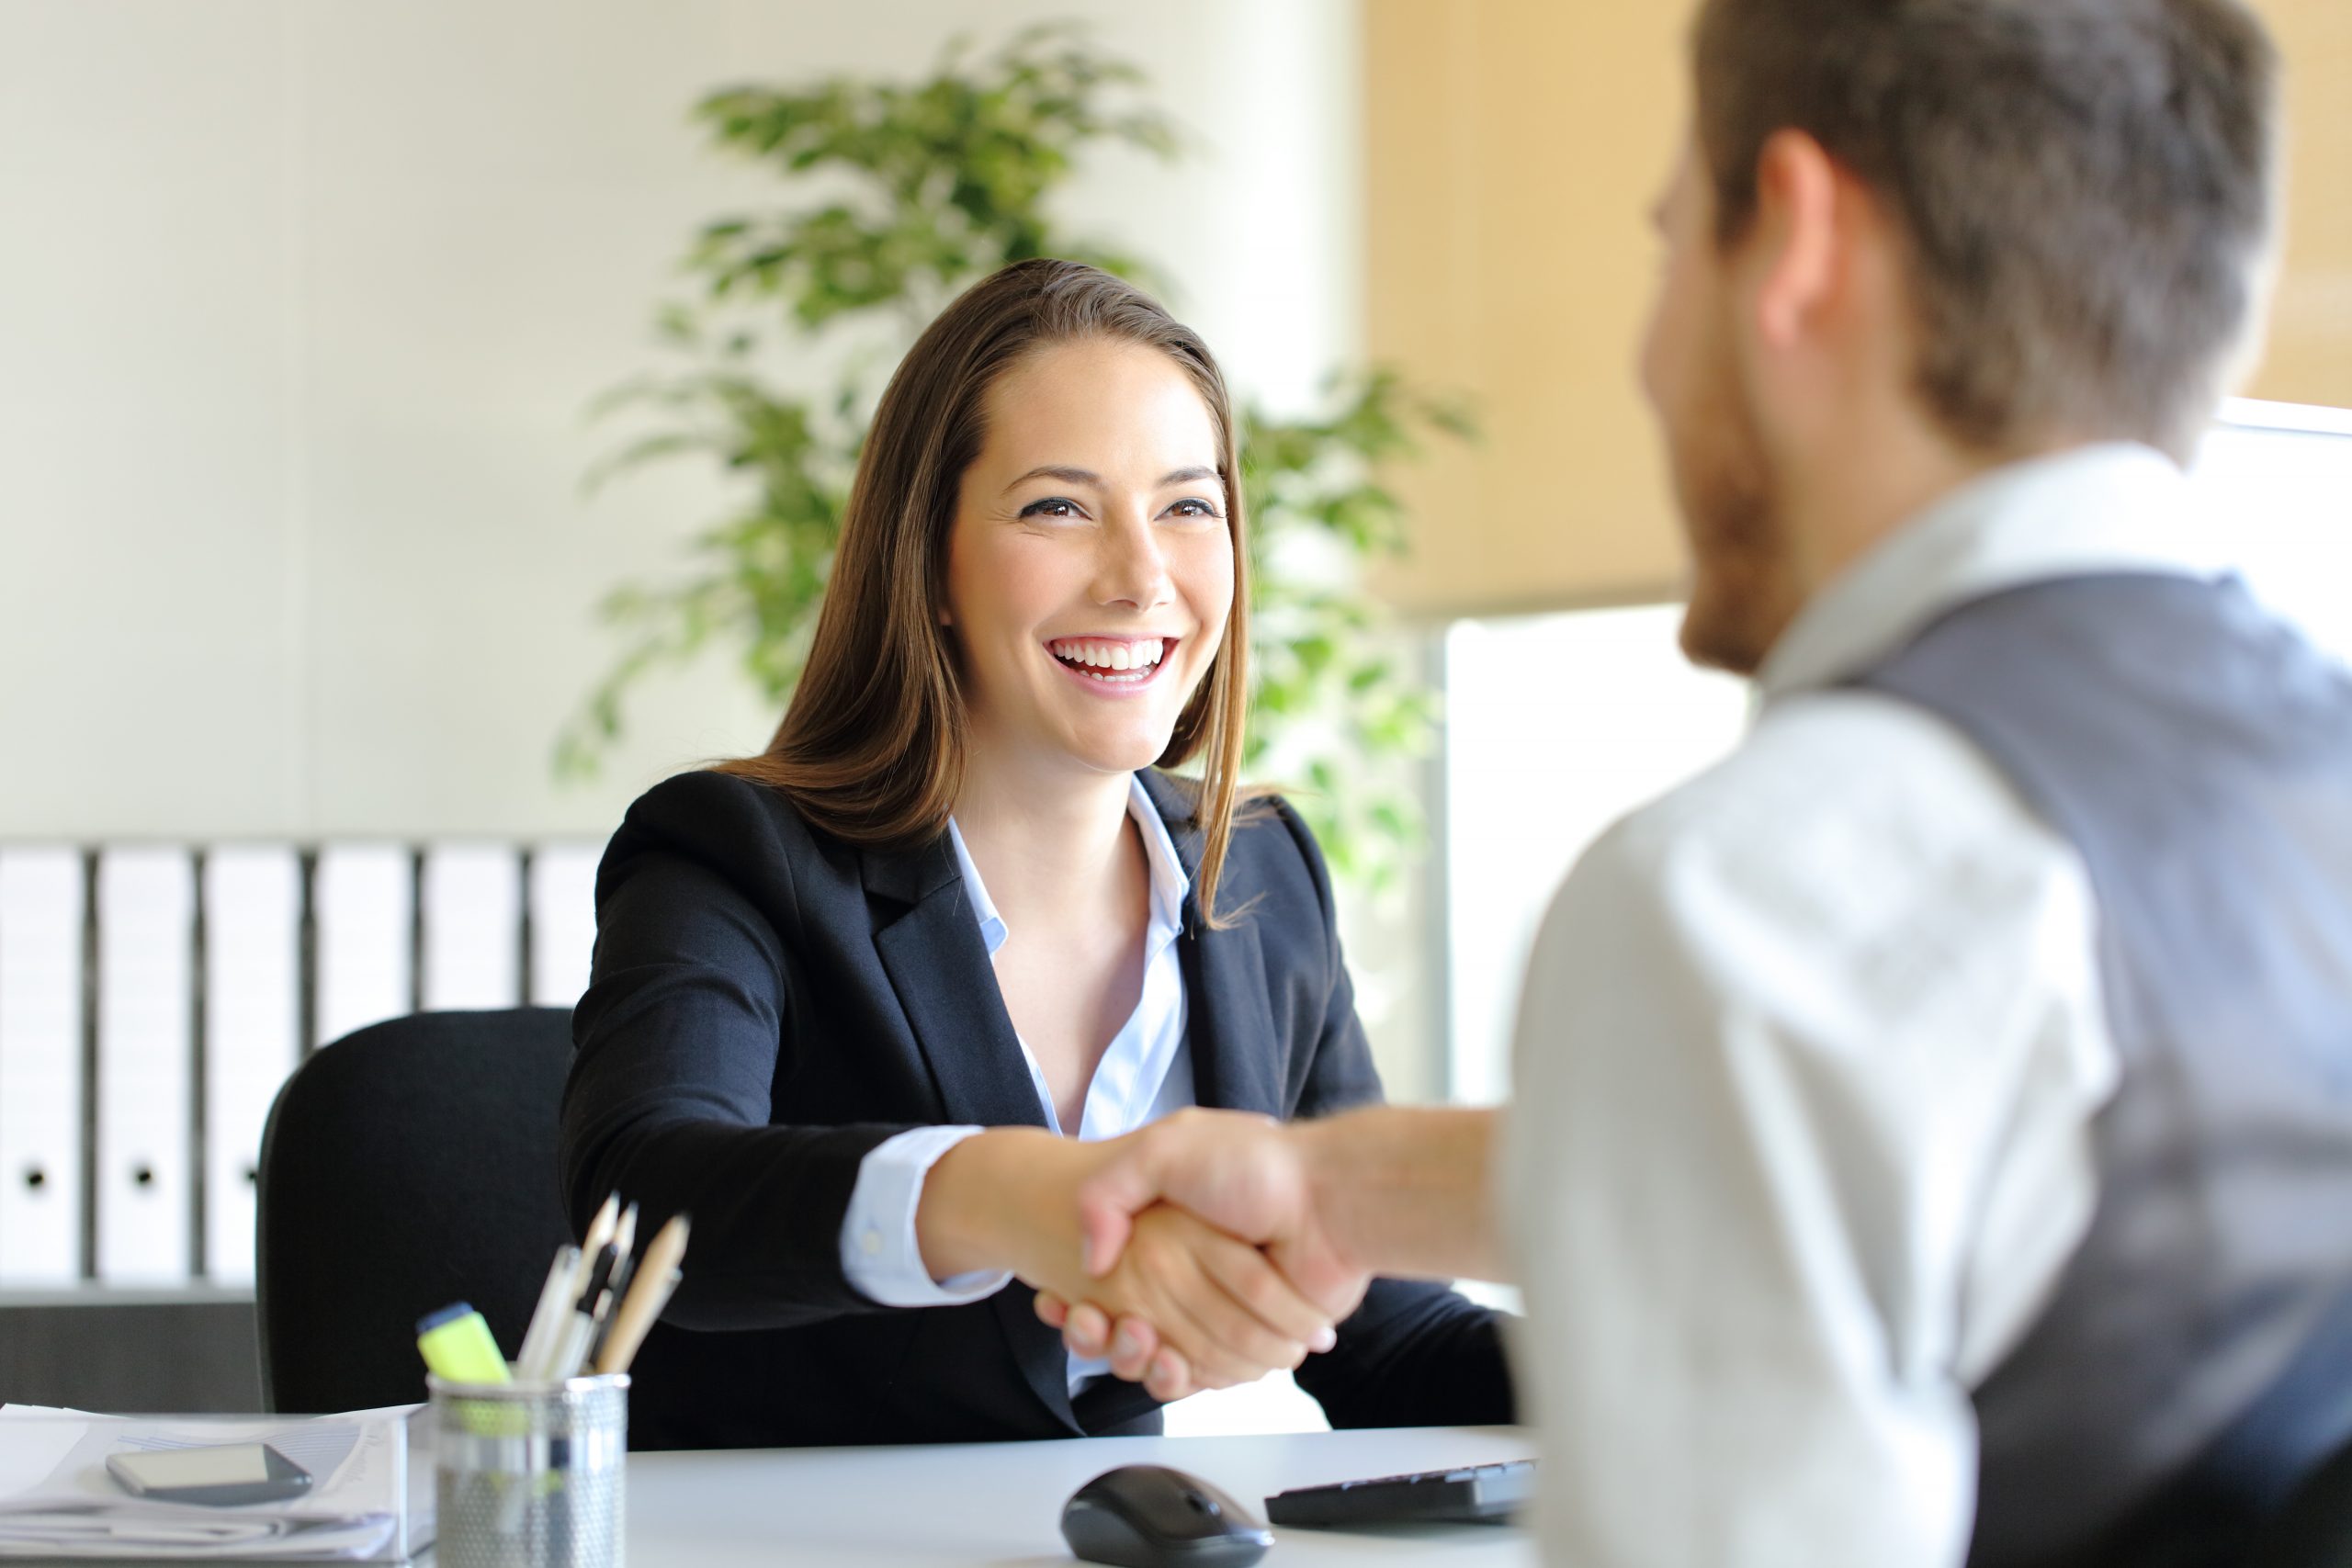 A professional shaking hands with a person across a desk in a bright office setting.